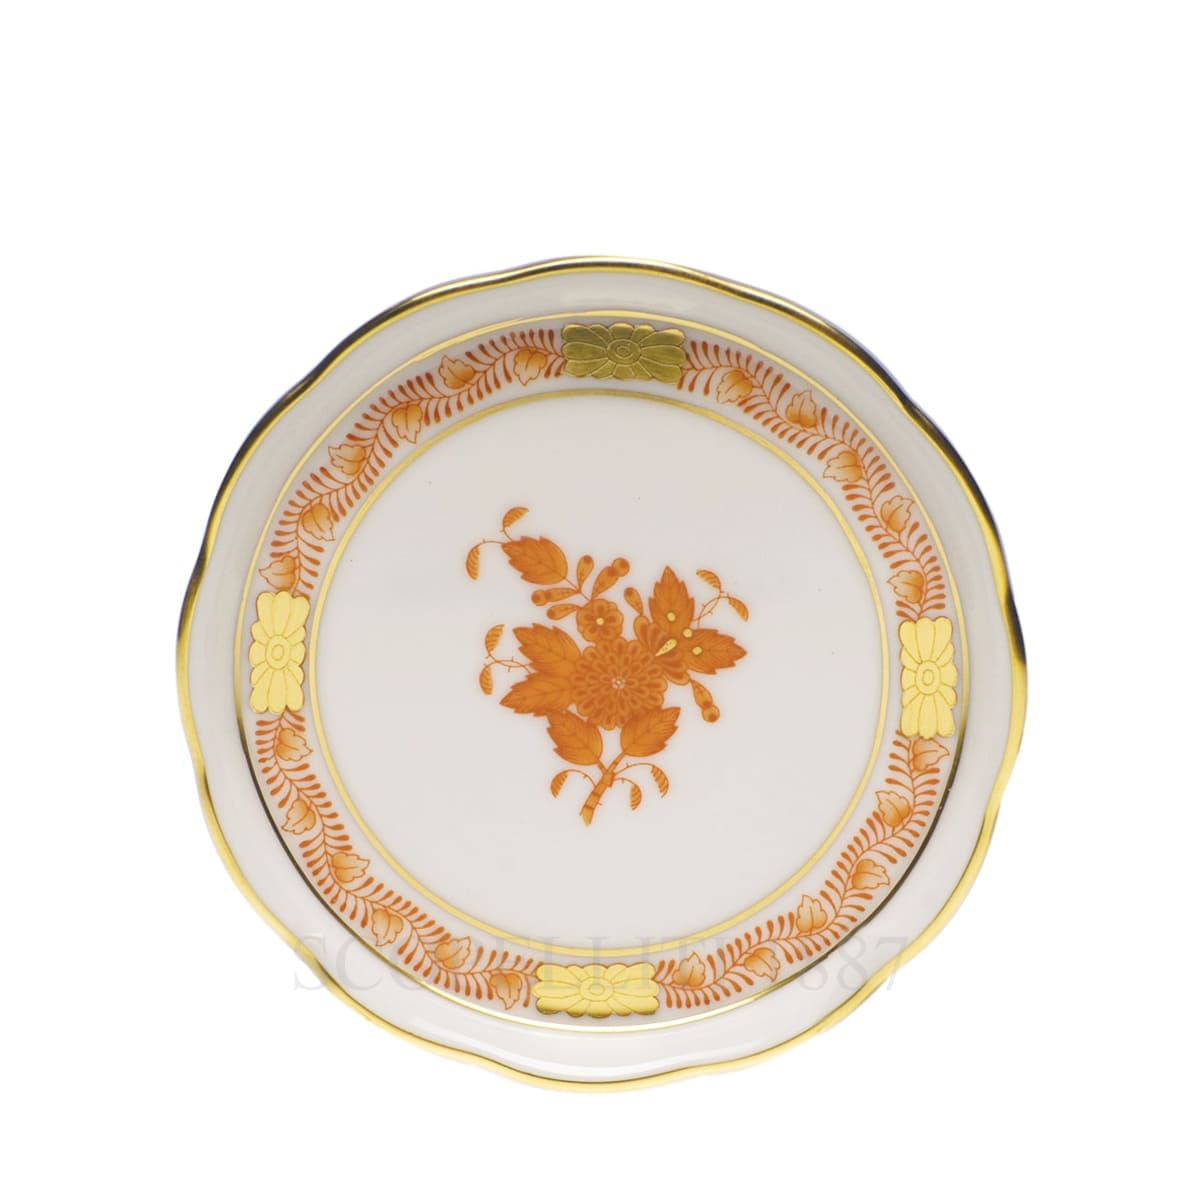 Porcelain Plates: an Antique and Refined Work of Art - SCOPELLITI 1887